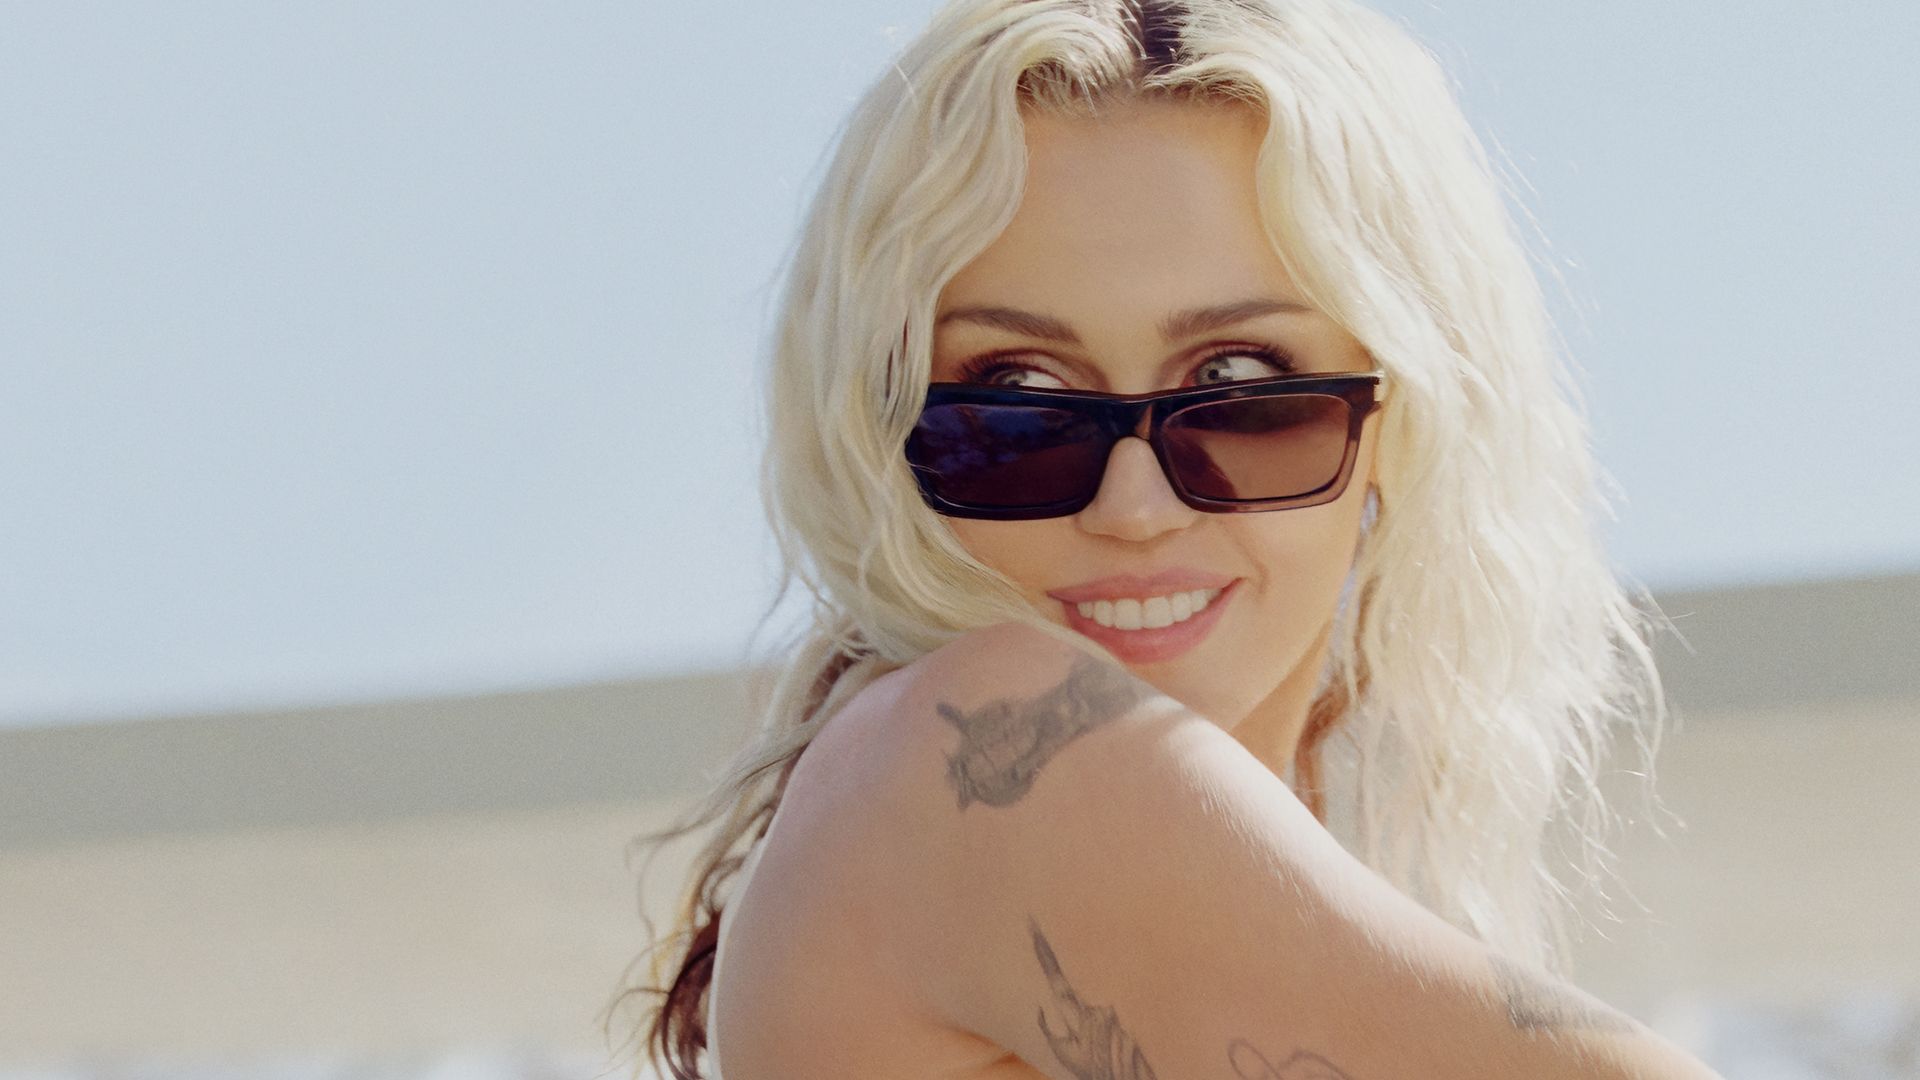 Miley Cyrus: Endless Summer Vacation (Backyard Sessions) background